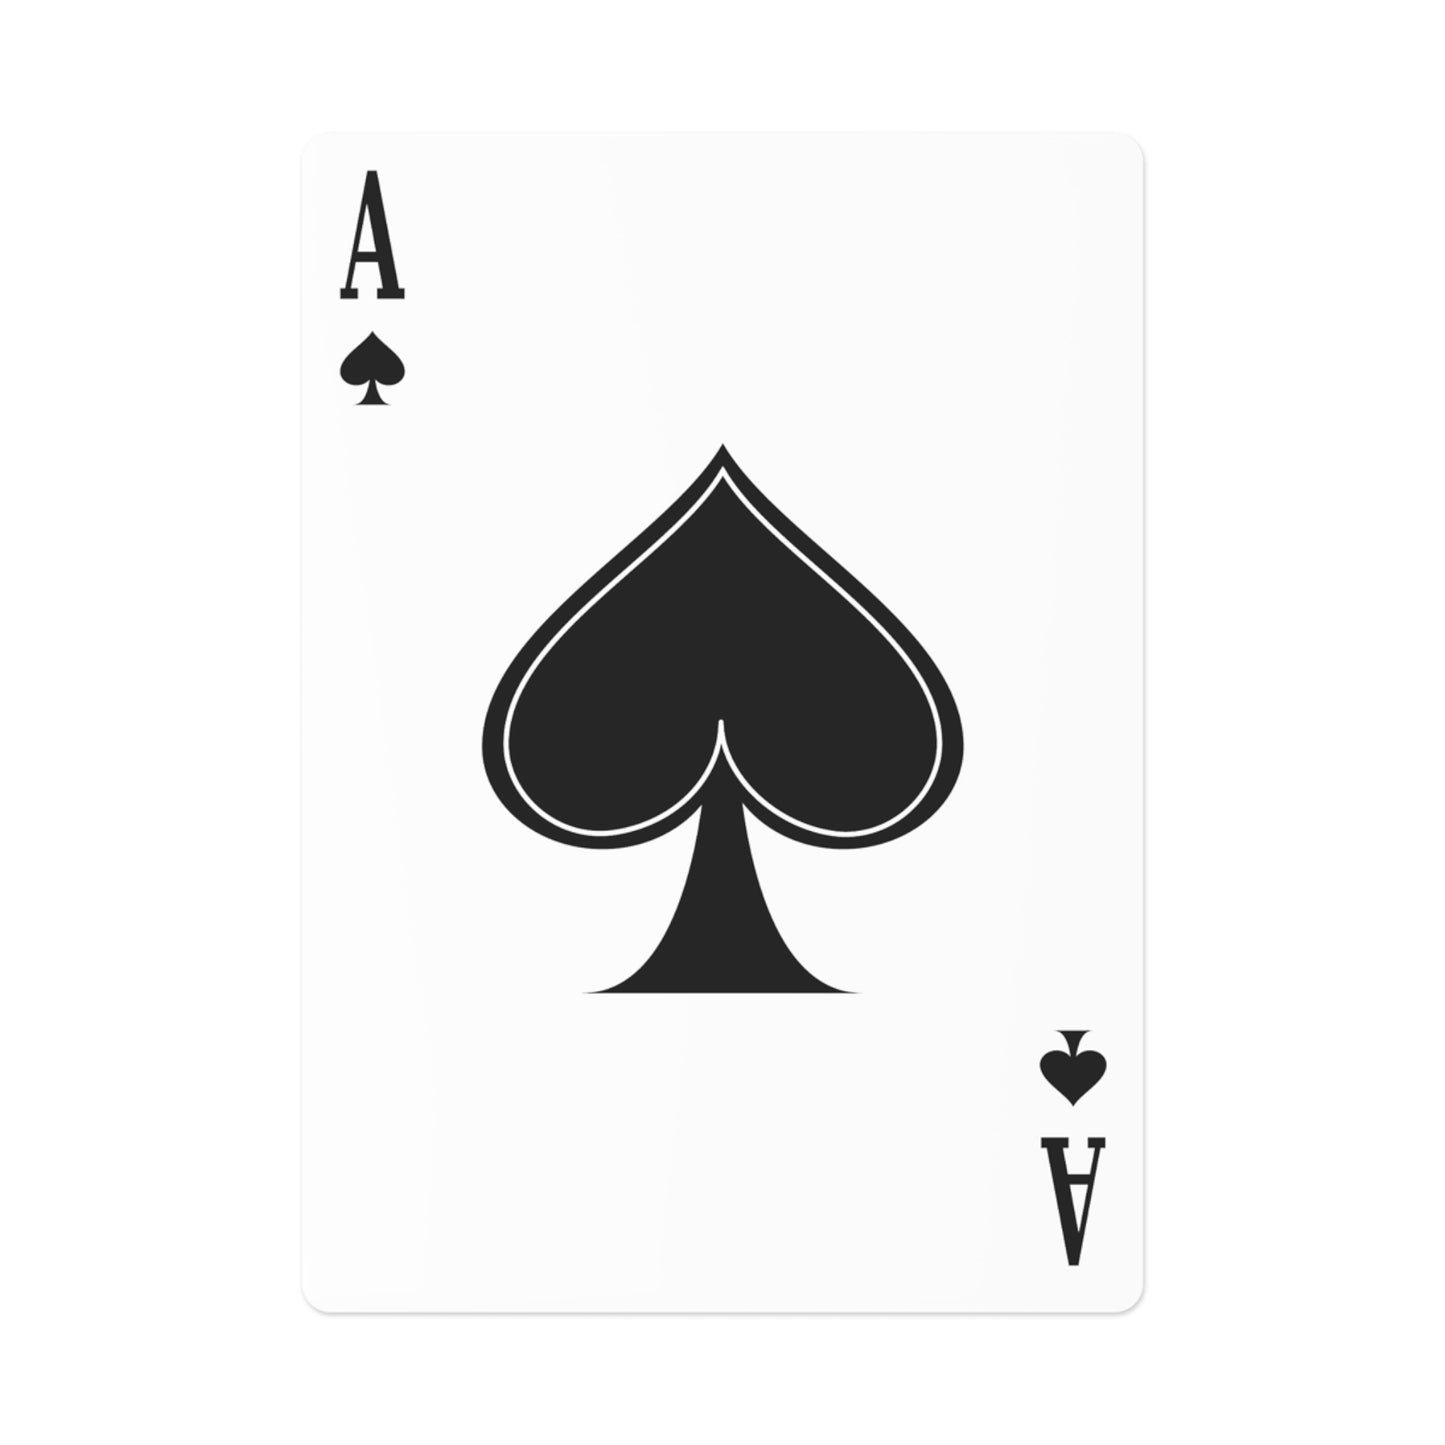 England's Best Export - Playing Cards